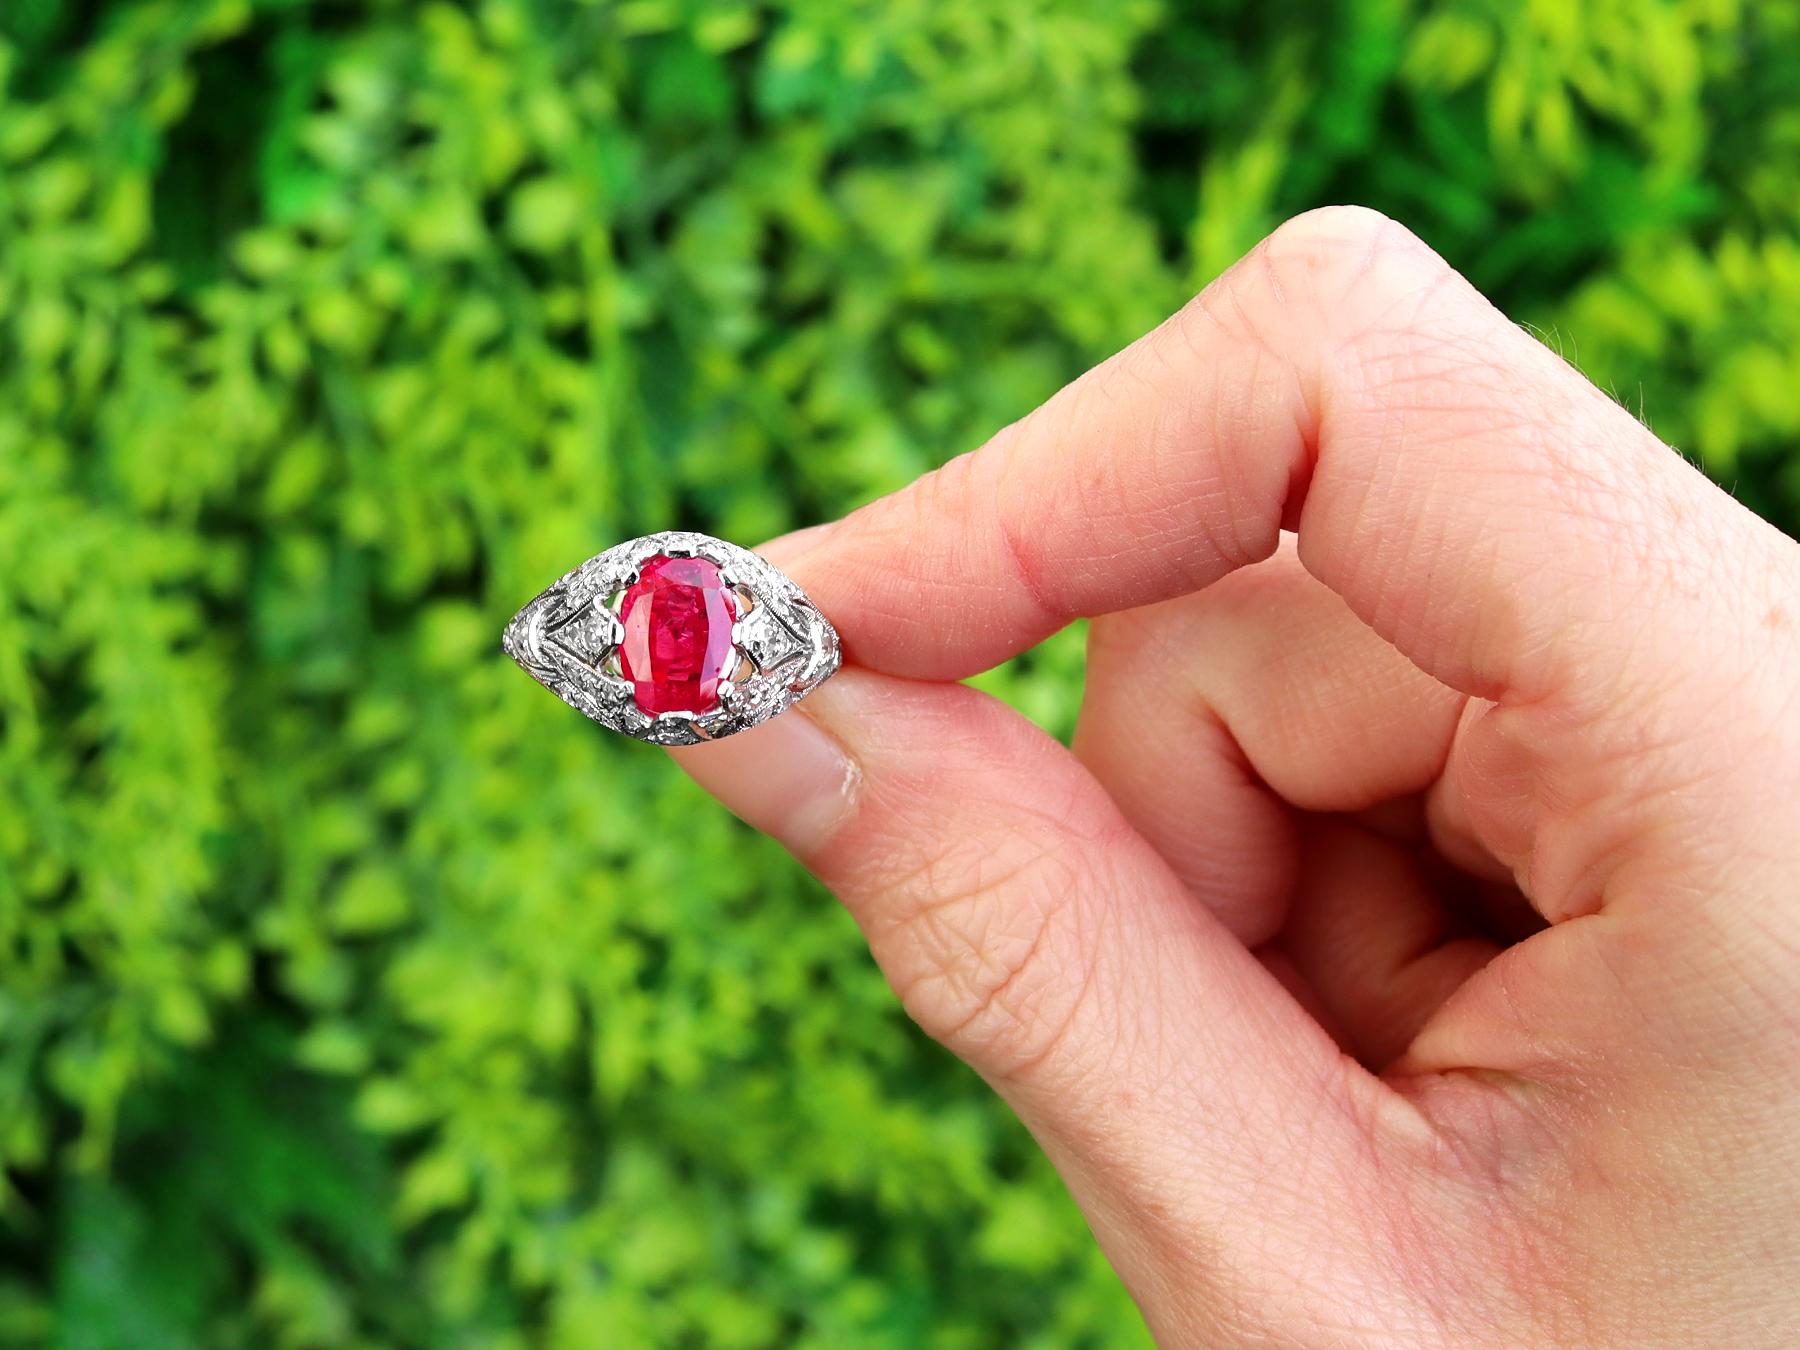 A stunning, fine and impressive antique 1.50 carat Burmese ruby and 0.66 carat diamond, platinum dress ring; part of our diverse Burmese ruby jewellery collections.

This stunning antique ruby ring has been crafted in platinum.

The pierced